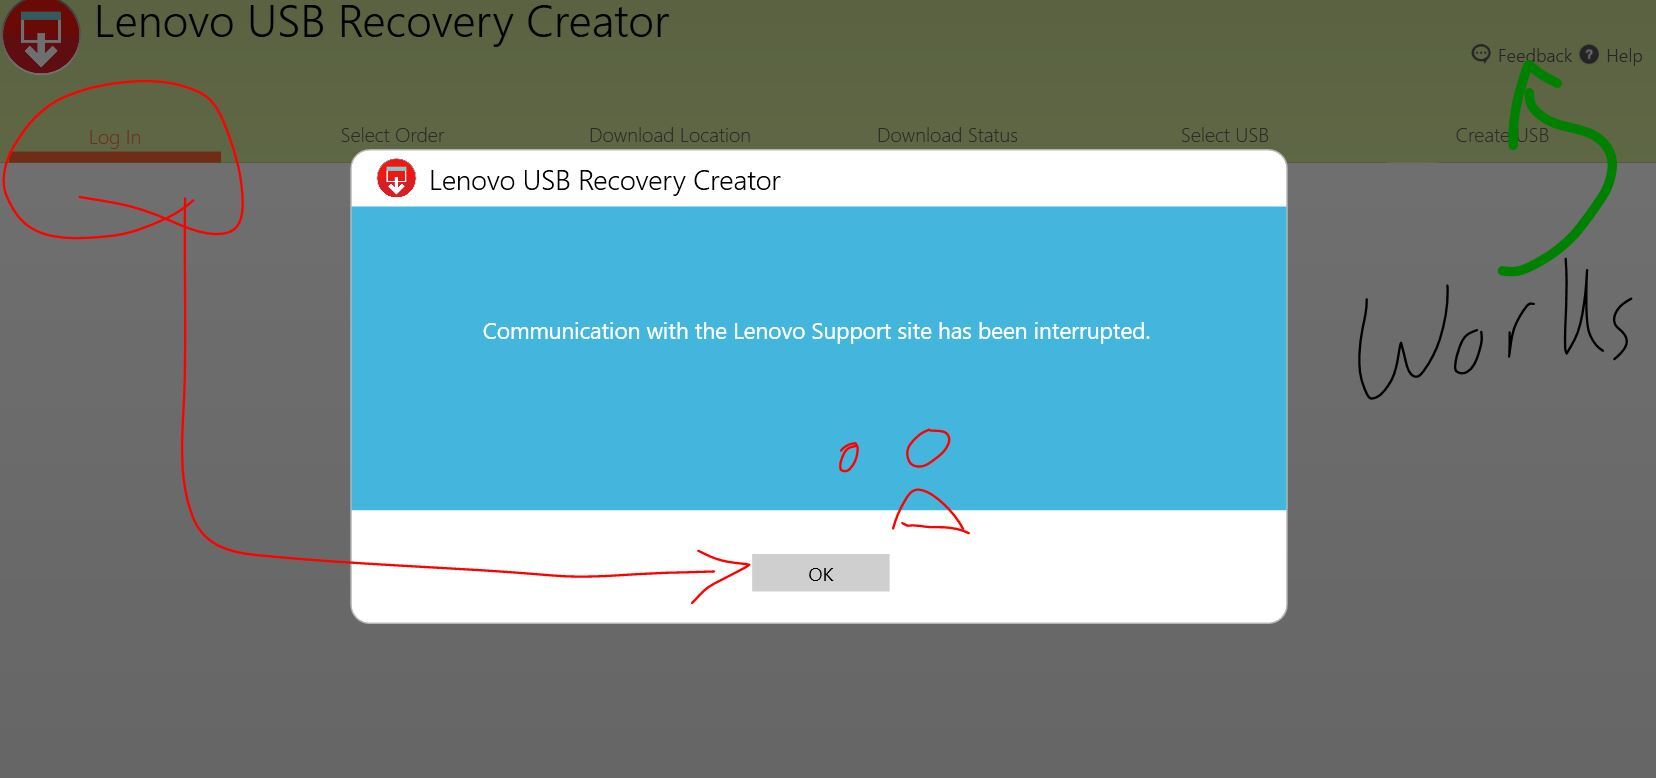 Lenovo-USB-Recovery-Creator-Communication-with-the-Lenovo-Support-Site-has-been-interrupted  - English Community - LENOVO COMMUNITY